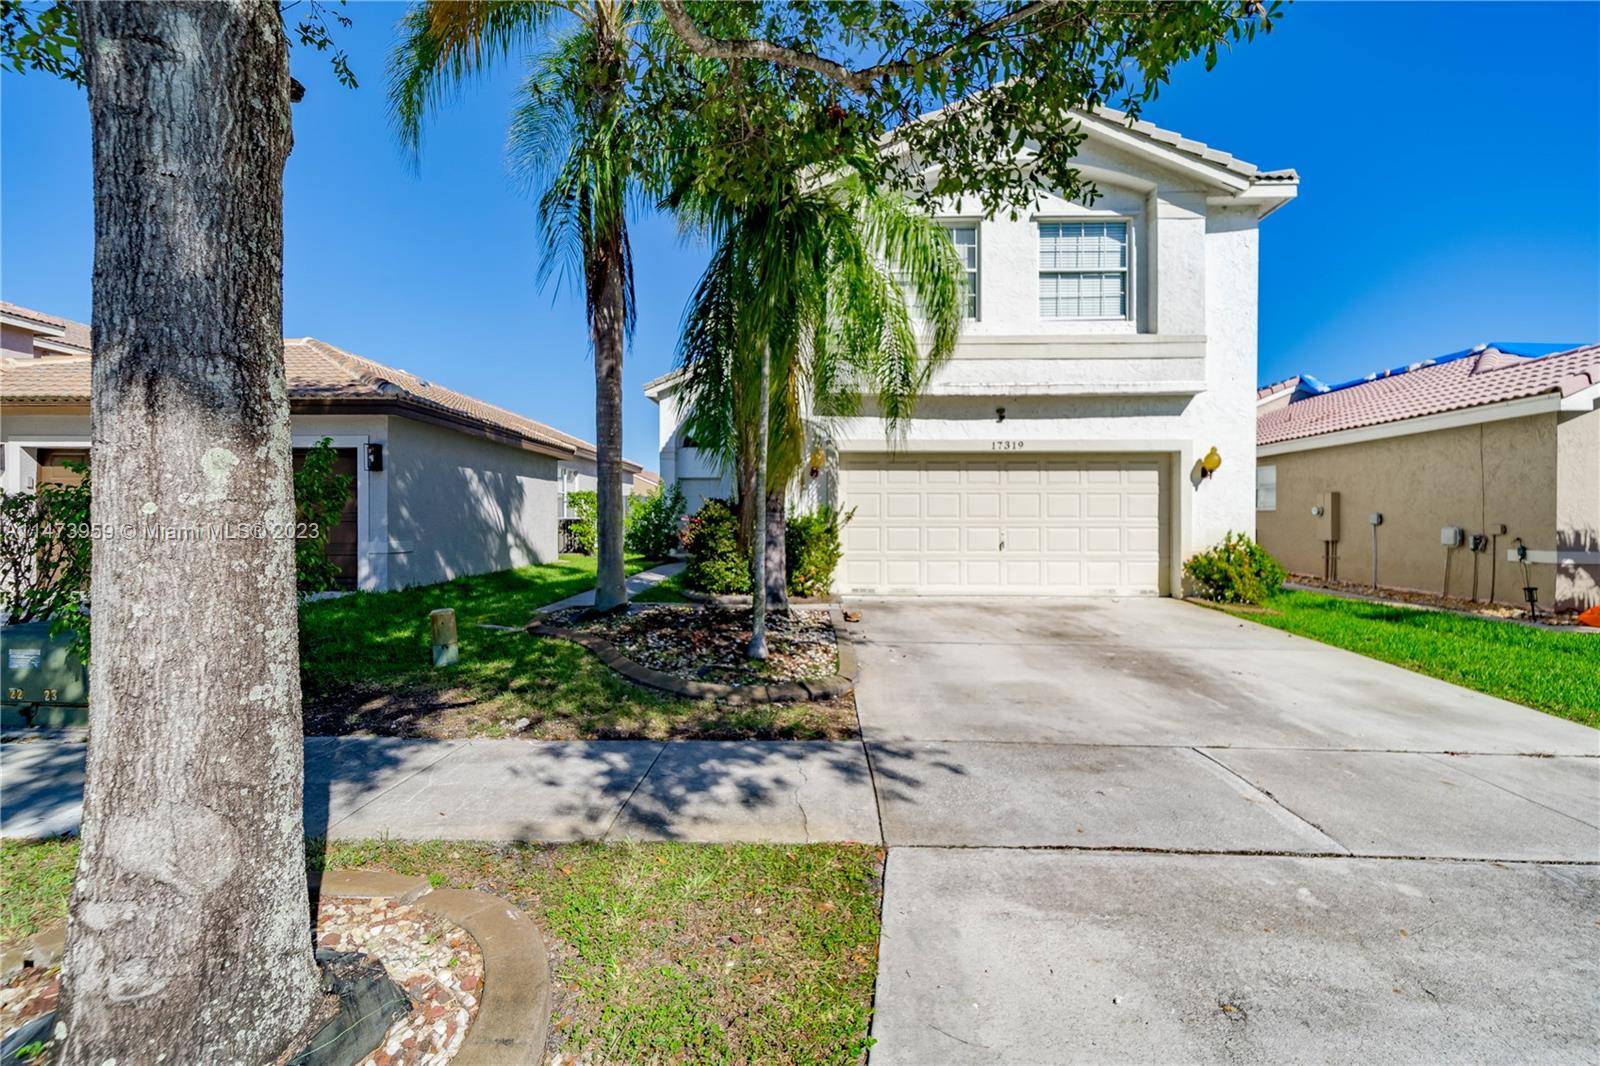 Wonderfully located single family home in the lovely desirable city of Miramar.